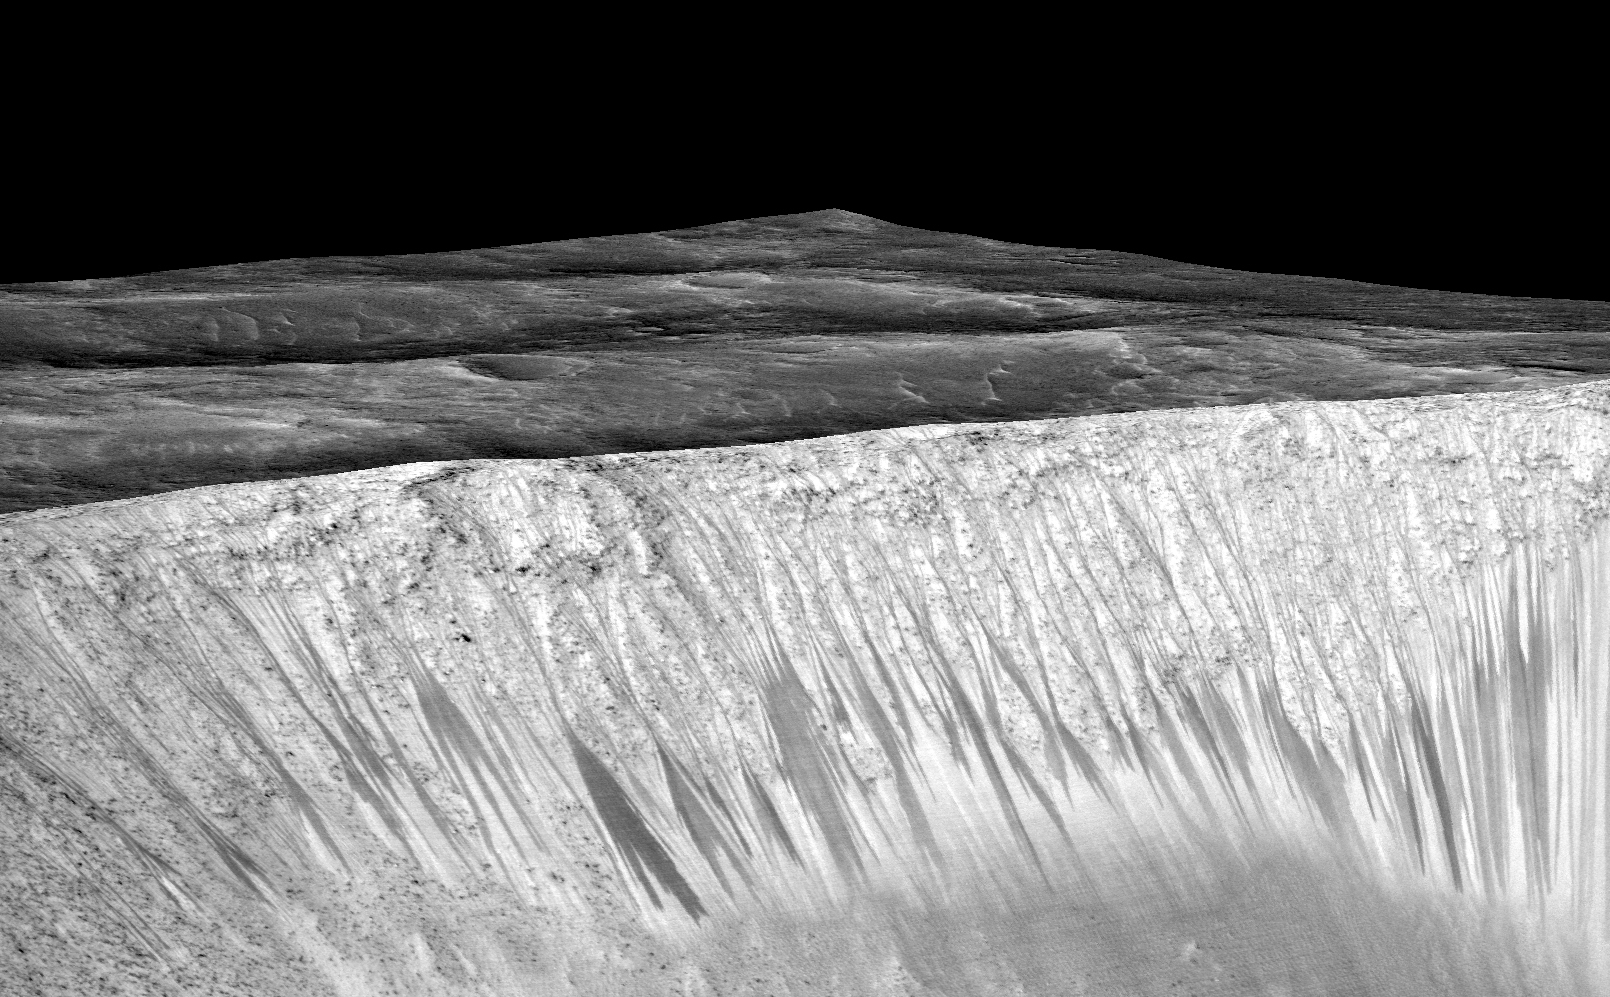 Dark narrow streaks, called "recurring slope lineae," emanate from the walls of Garni Crater on Mars, in this view constructed from observations by the High Resolution Imaging Science Experiment (HiRISE) camera on NASA's Mars Reconnaissance Orbiter.